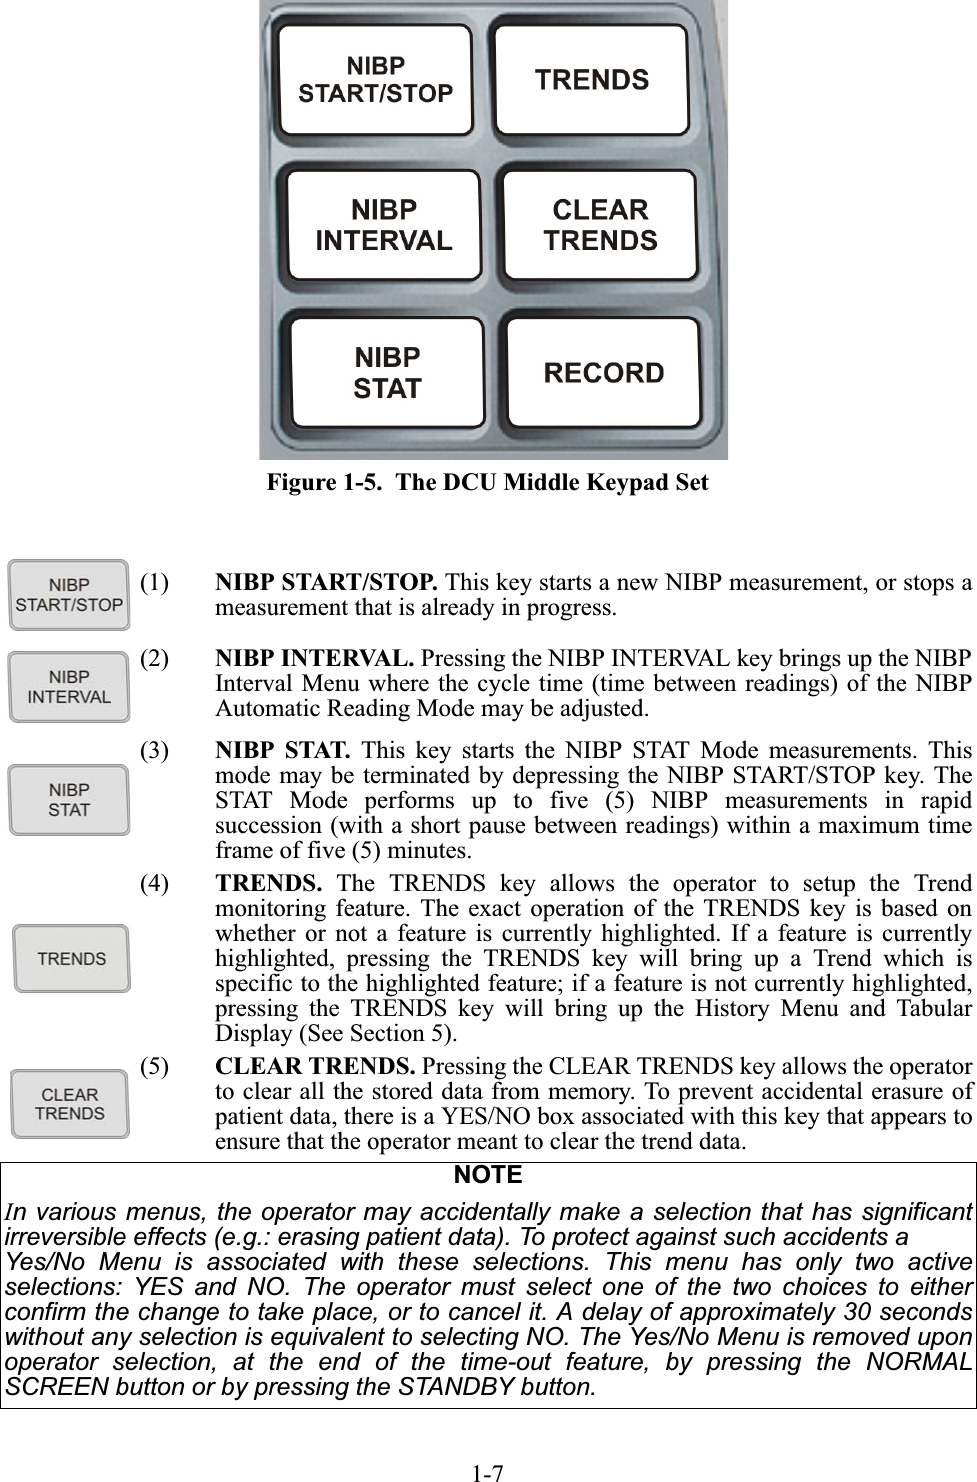 1-7Figure 1-5.  The DCU Middle Keypad Set(1) NIBP START/STOP. This key starts a new NIBP measurement, or stops ameasurement that is already in progress.(2) NIBP INTERVAL. Pressing the NIBP INTERVAL key brings up the NIBPInterval Menu where the cycle time (time between readings) of the NIBPAutomatic Reading Mode may be adjusted.(3) NIBP STAT. This key starts the NIBP STAT Mode measurements. Thismode may be terminated by depressing the NIBP START/STOP key. TheSTAT Mode performs up to five (5) NIBP measurements in rapidsuccession (with a short pause between readings) within a maximum timeframe of five (5) minutes.(4) TRENDS. The TRENDS key allows the operator to setup the Trendmonitoring feature. The exact operation of the TRENDS key is based onwhether or not a feature is currently highlighted. If a feature is currentlyhighlighted, pressing the TRENDS key will bring up a Trend which isspecific to the highlighted feature; if a feature is not currently highlighted,pressing the TRENDS key will bring up the History Menu and TabularDisplay (See Section 5).(5) CLEAR TRENDS. Pressing the CLEAR TRENDS key allows the operatorto clear all the stored data from memory. To prevent accidental erasure ofpatient data, there is a YES/NO box associated with this key that appears toensure that the operator meant to clear the trend data.NOTEIn various menus, the operator may accidentally make a selection that has significantirreversible effects (e.g.: erasing patient data). To protect against such accidents a Yes/No Menu is associated with these selections. This menu has only two activeselections: YES and NO. The operator must select one of the two choices to eitherconfirm the change to take place, or to cancel it. A delay of approximately 30 secondswithout any selection is equivalent to selecting NO. The Yes/No Menu is removed uponoperator selection, at the end of the time-out feature, by pressing the NORMALSCREEN button or by pressing the STANDBY button.